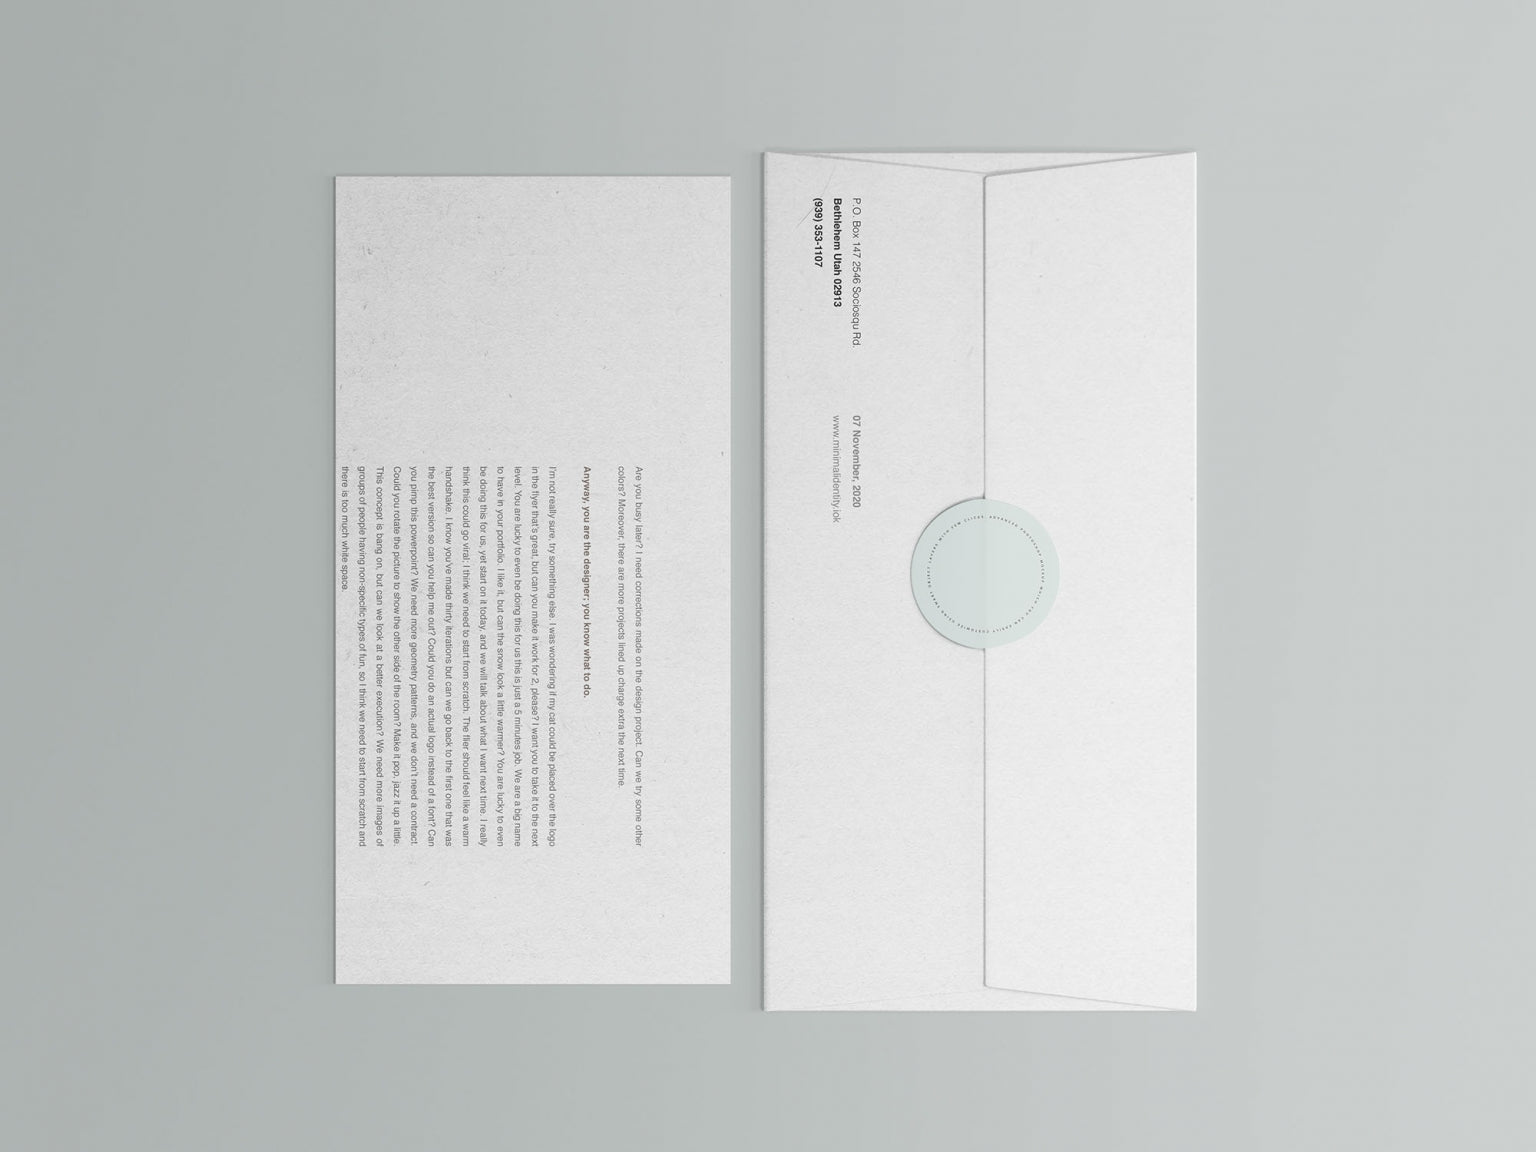 Free Corporate Envelope And Letter Mockup